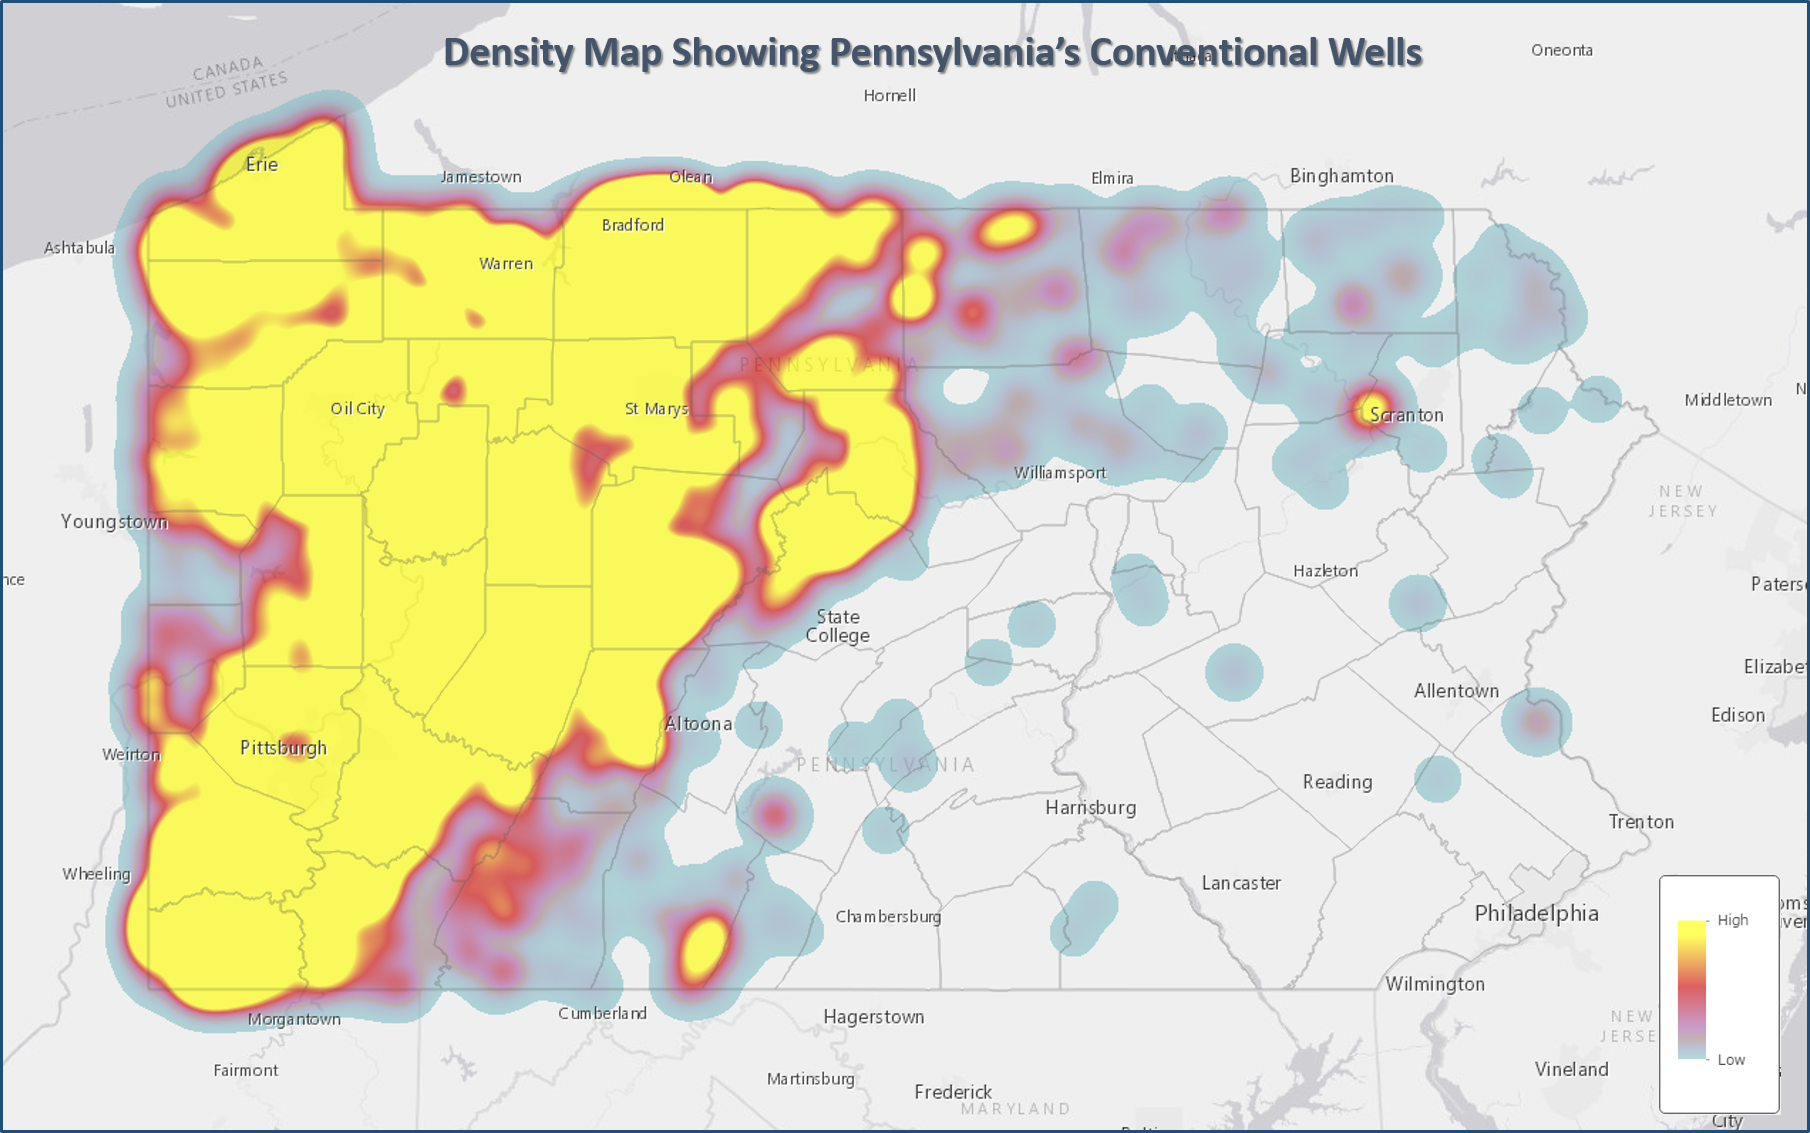 Density Map Showing Pennsylvania’s Conventional Wells